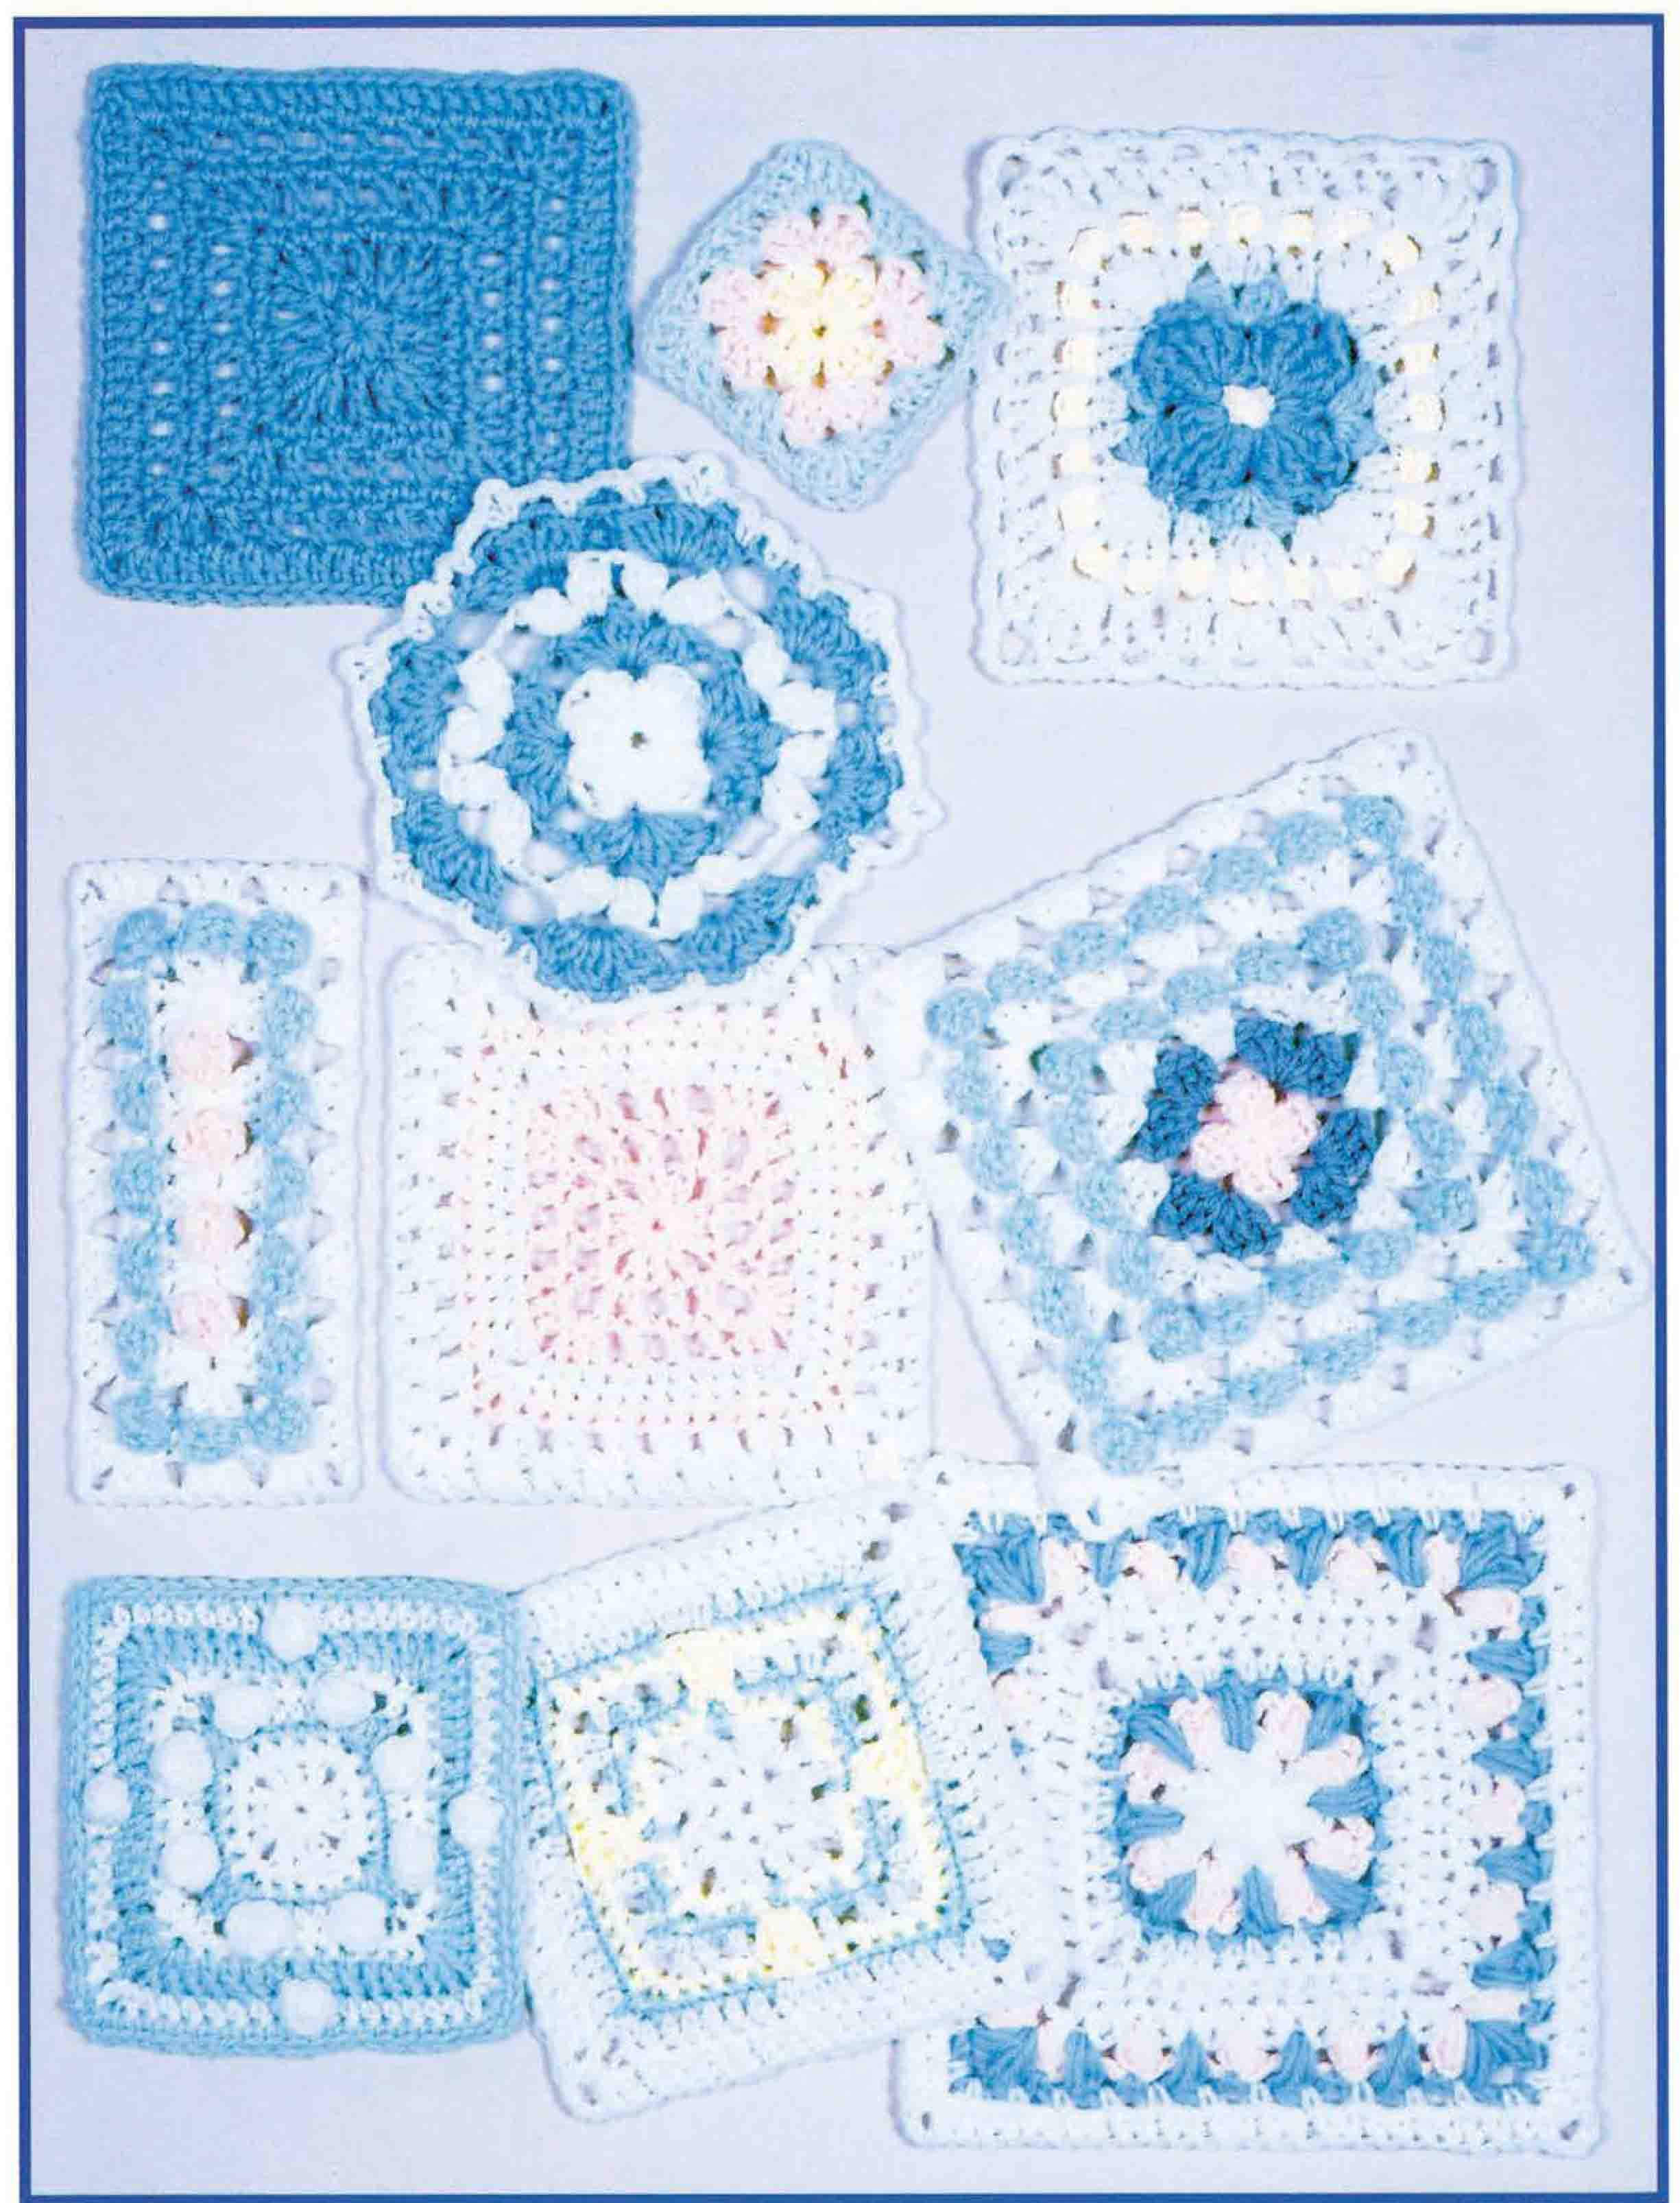 Been working on this for a year, all the granny squares in a book